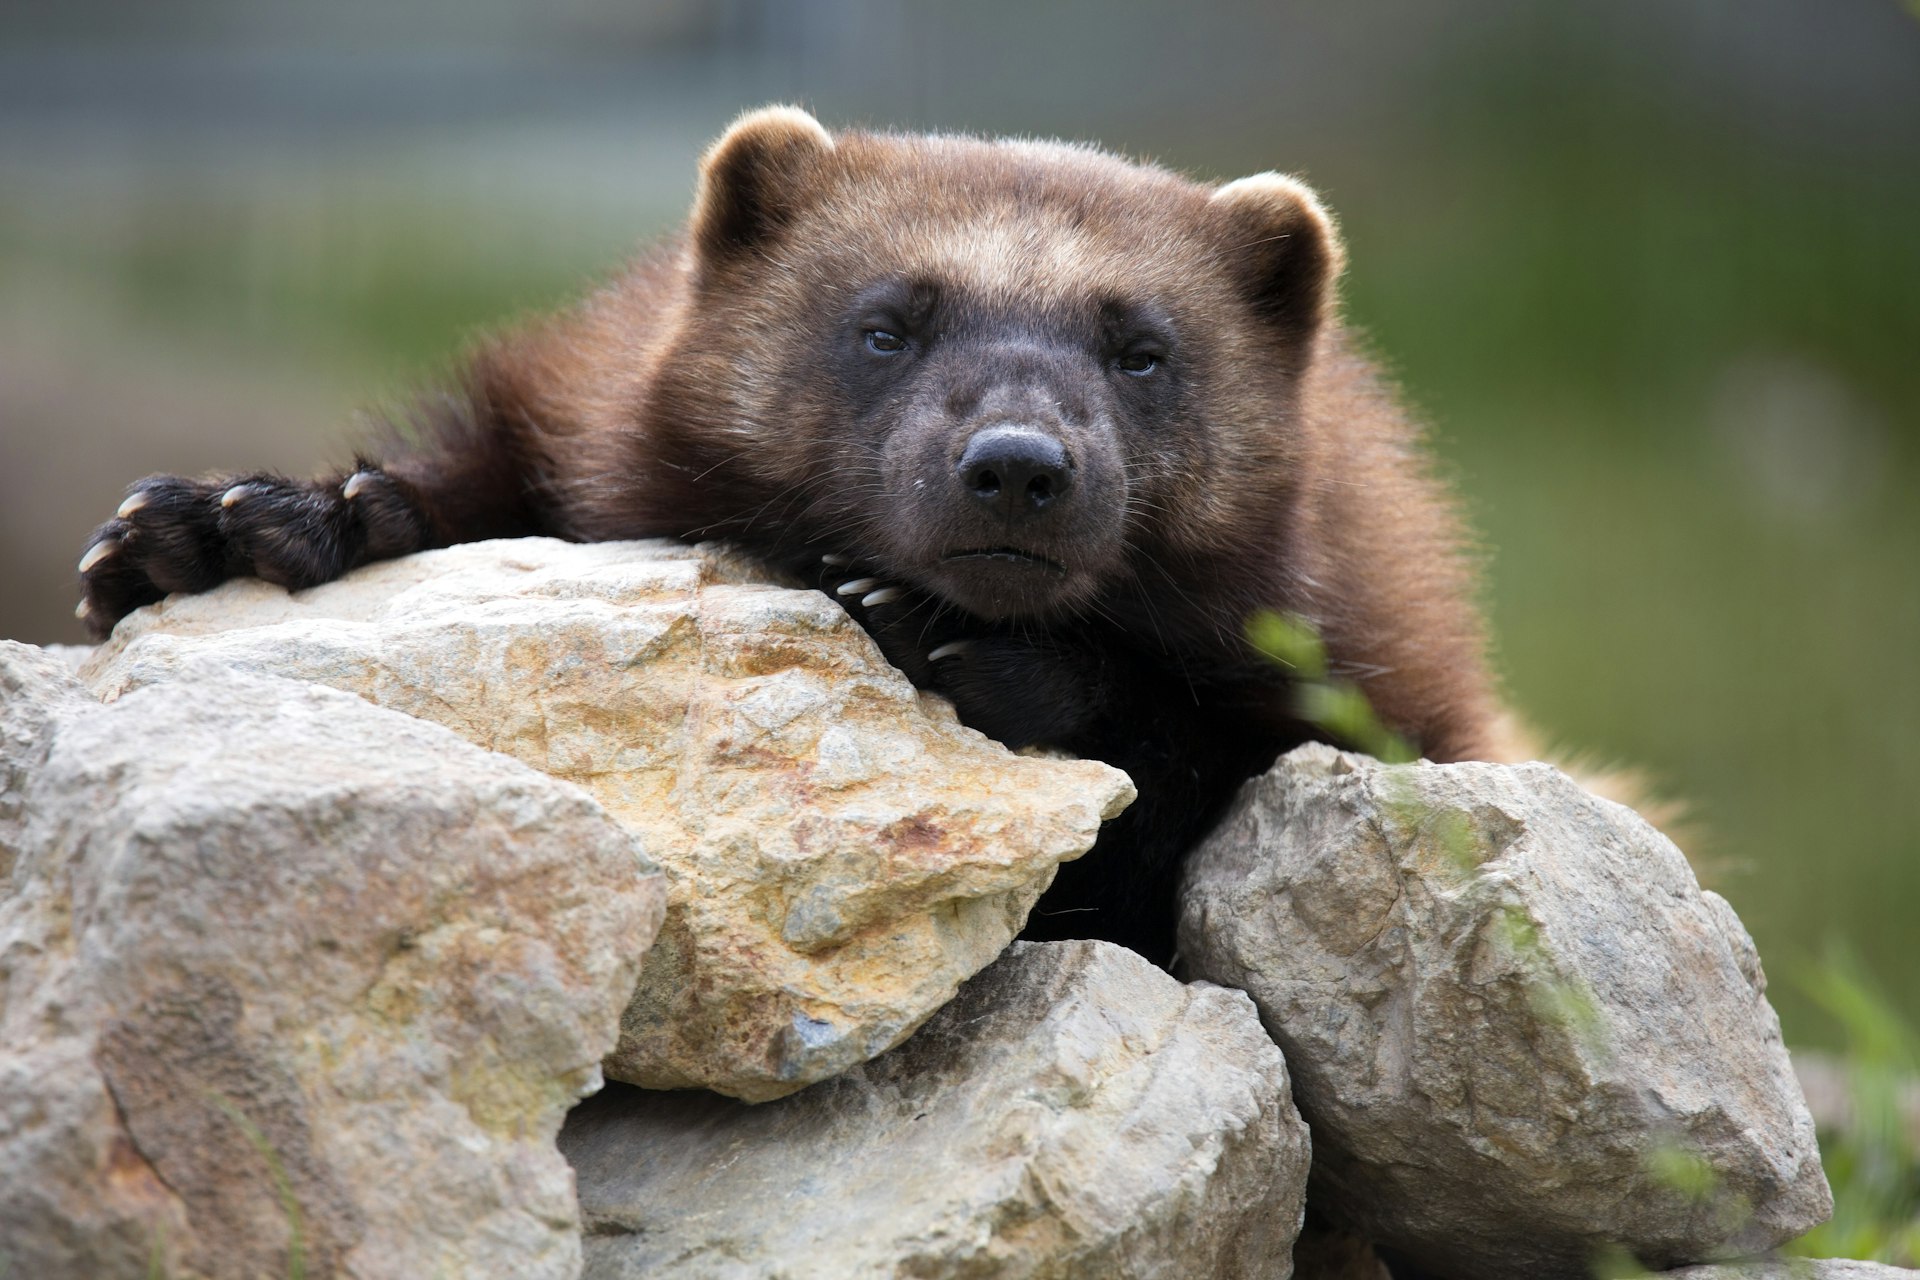 A wolverine peeping out from behind rocks